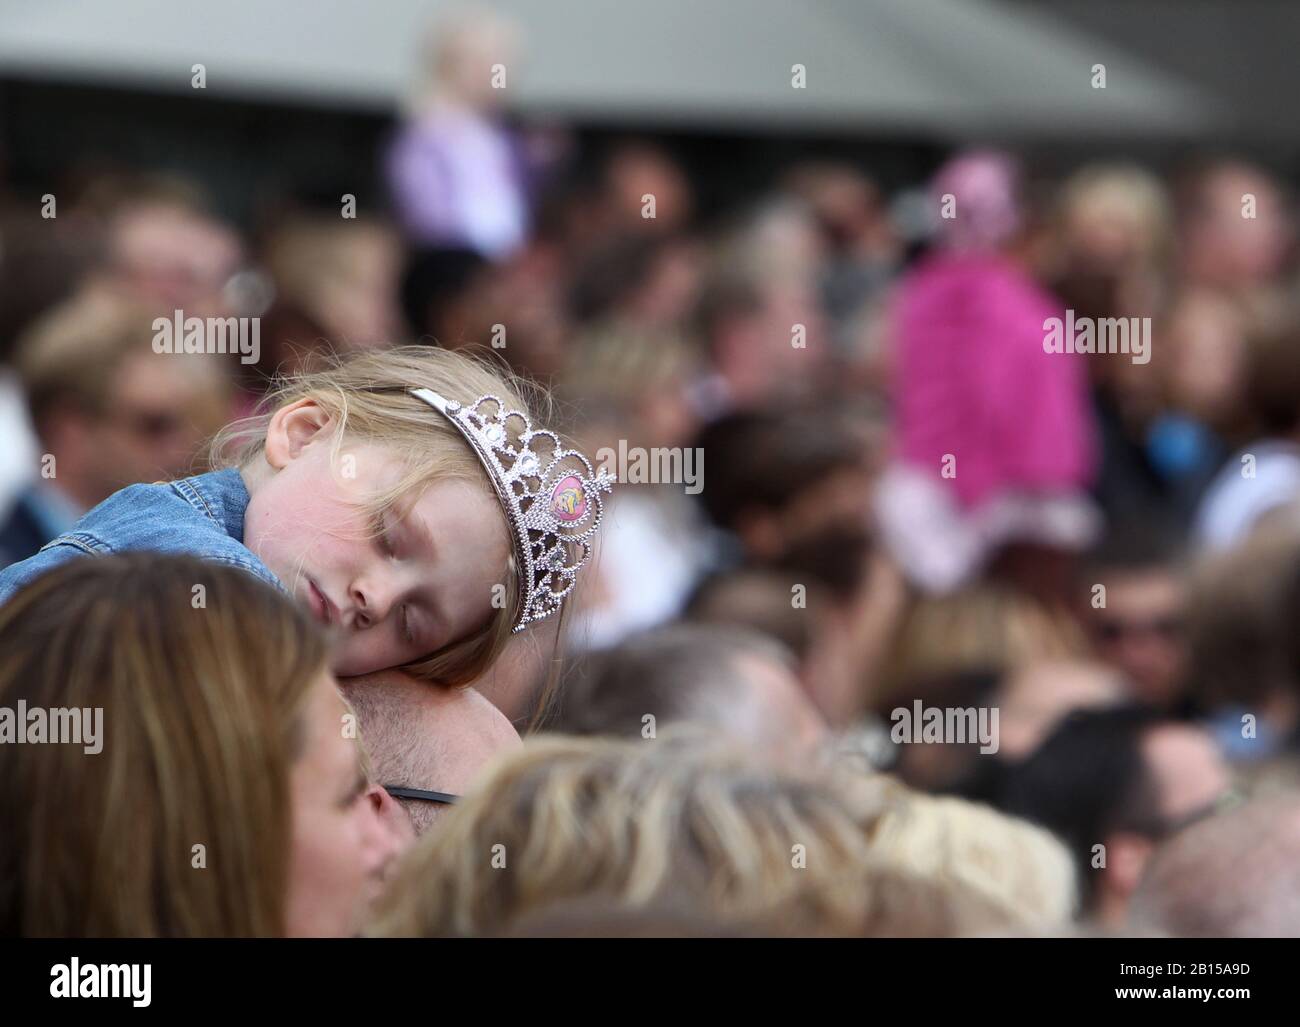 Stockholm, Sweden 2010-06-19 Tired little girl with princess crown during the wedding between Crown Princess Victoria and Prince Daniel. The wedding of Victoria, Crown Princess of Sweden, and Daniel Westling took place on 19 June 2010 in Stockholm Cathedral. Photo Jeppe Gustafsson Stock Photo